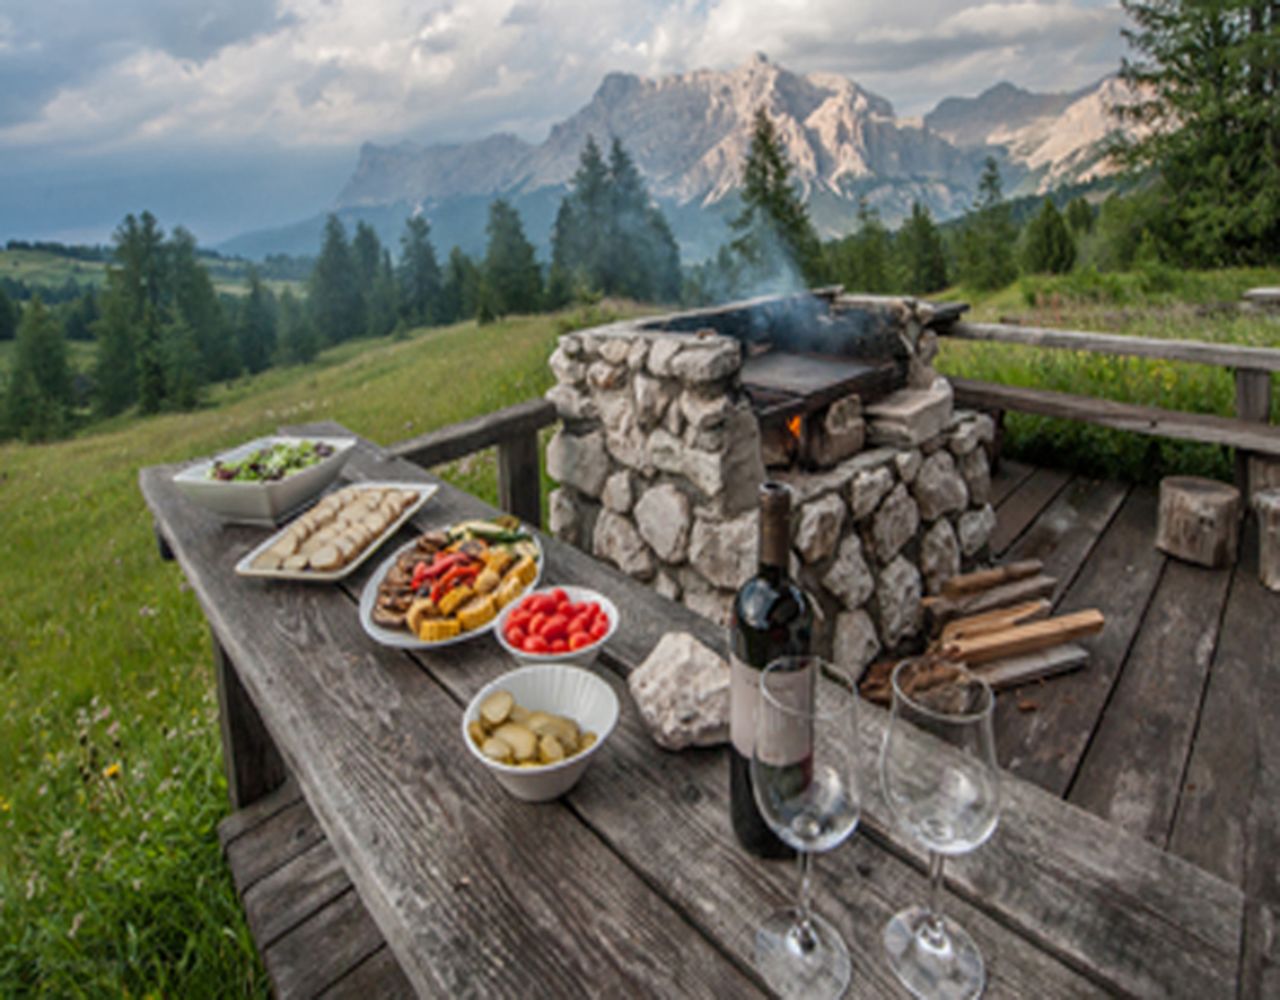 Hikes or overnight trips in mountain huts located in the northern corner of Italy wouldn't be the same without regional foods, including speck (smoked ham) and cajinci (ravioli with ricotta and spinach).